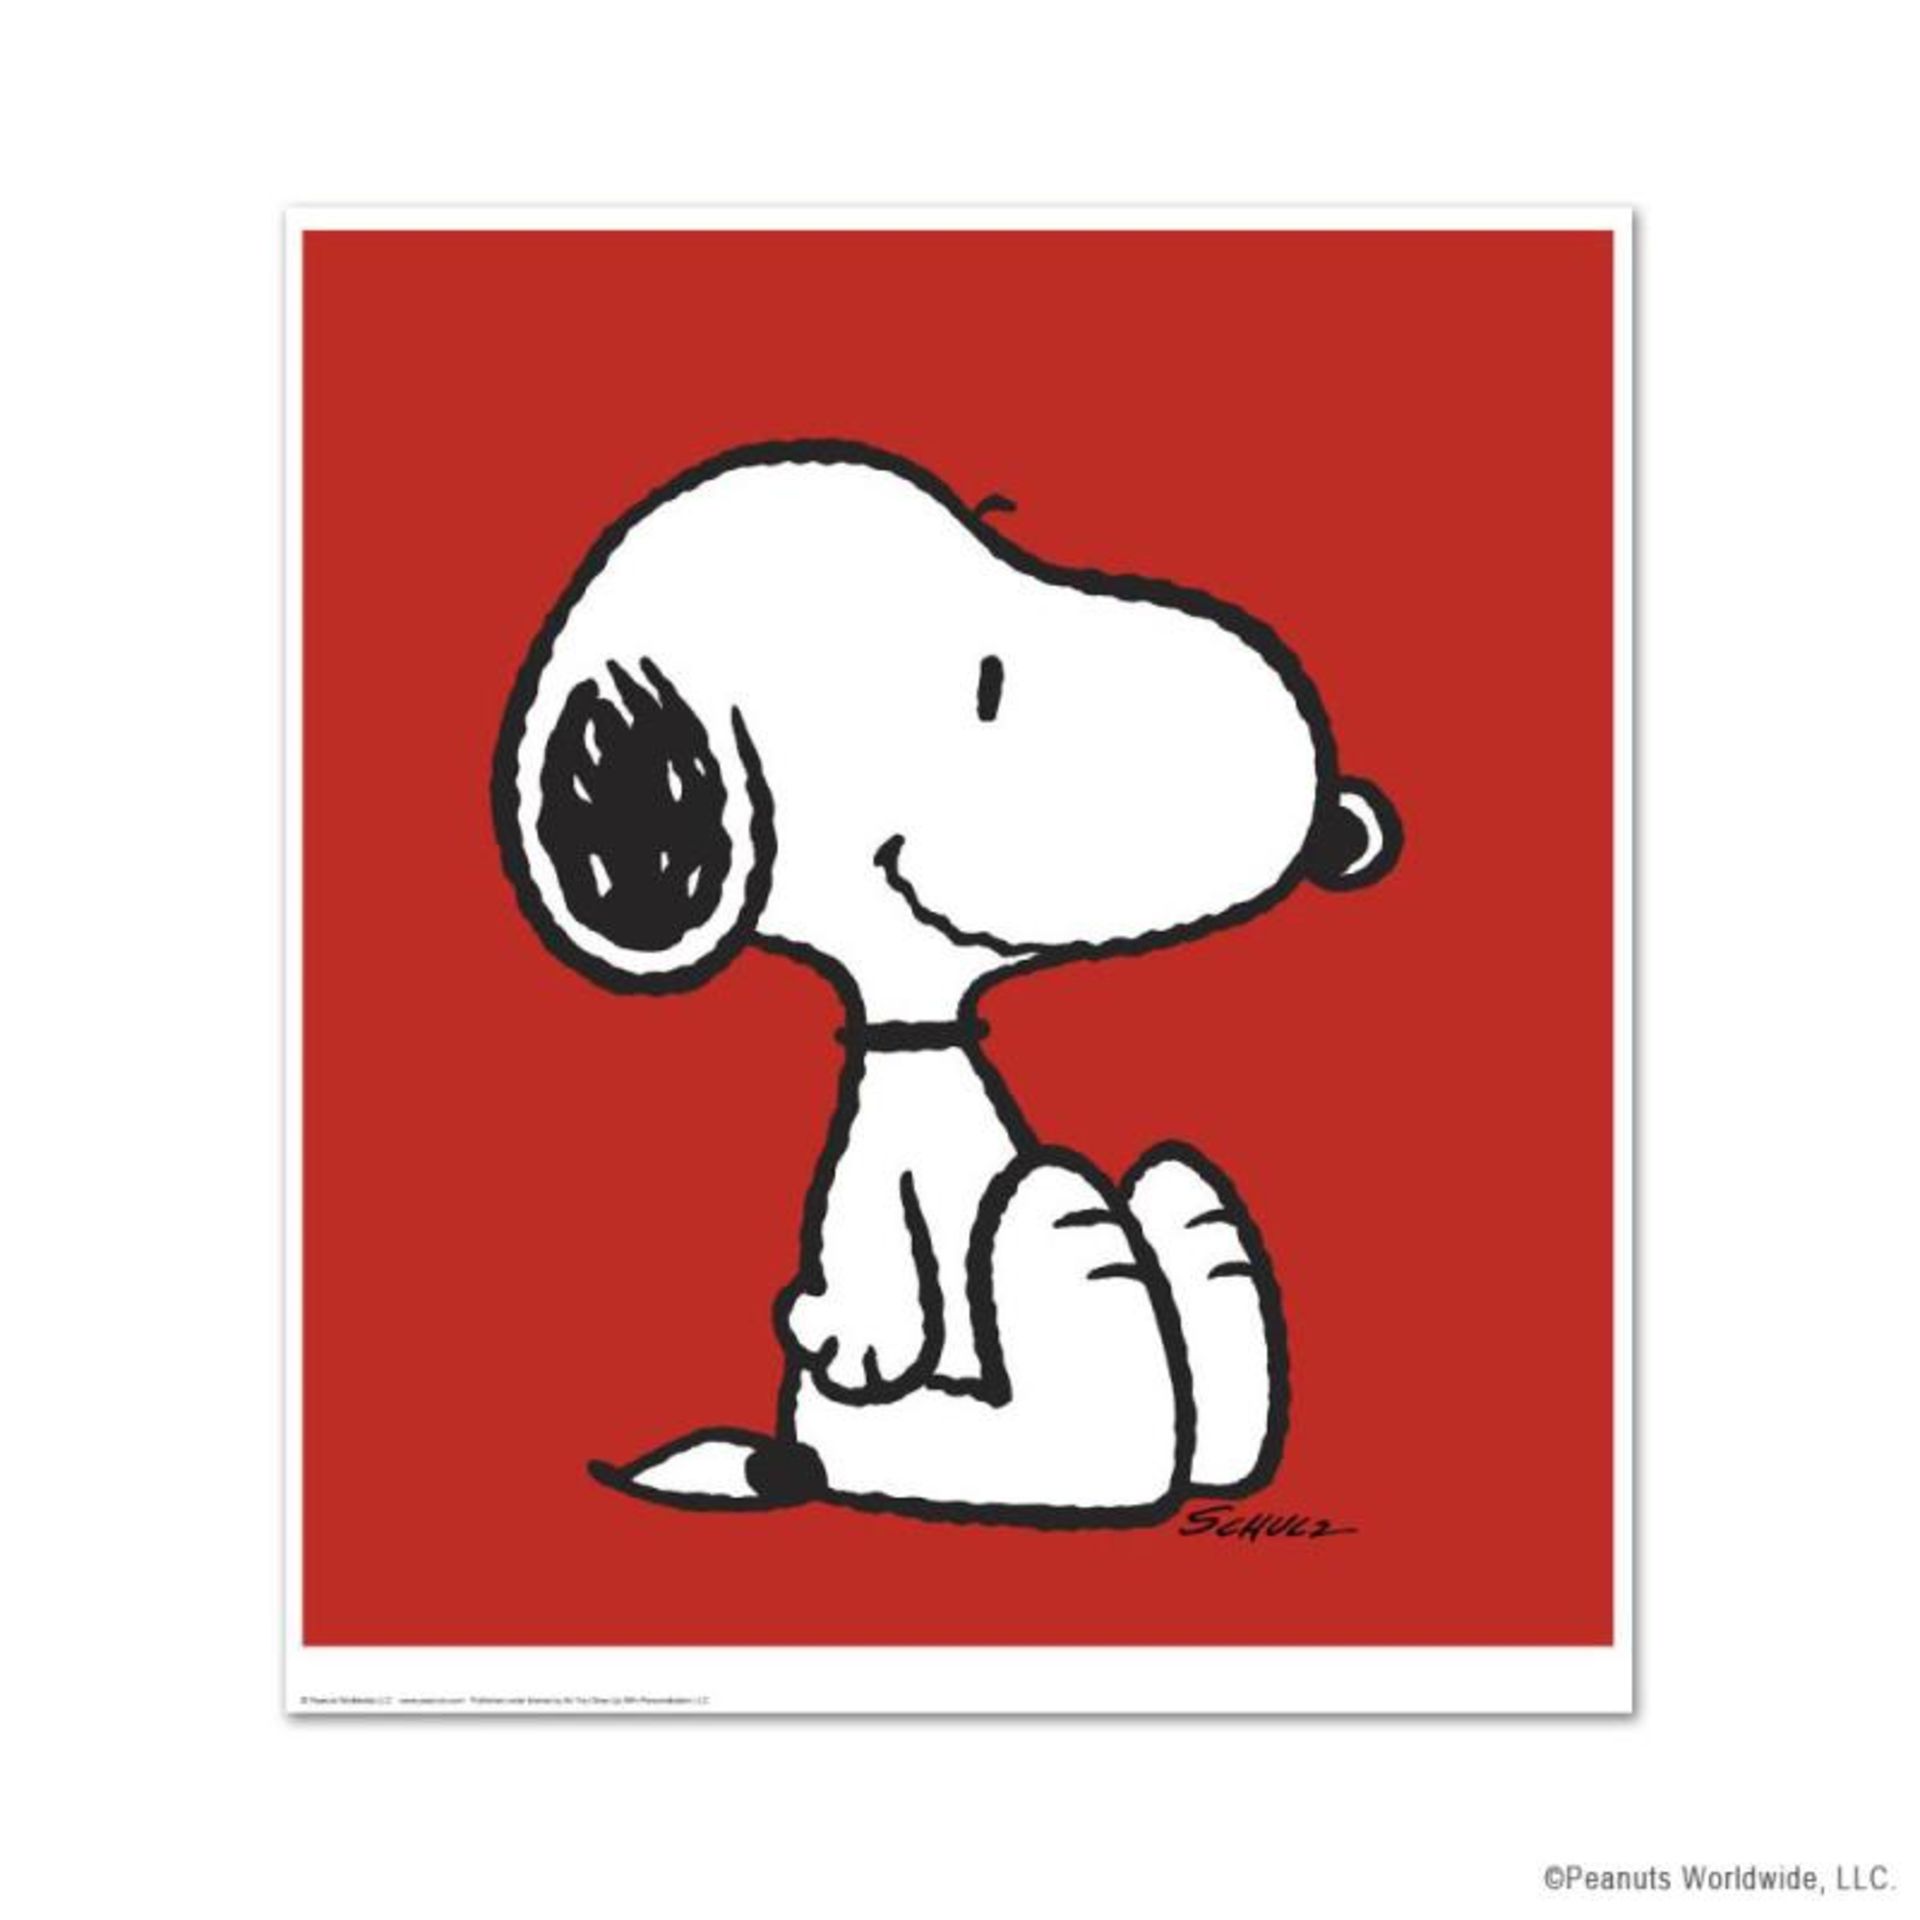 Peanuts, "Snoopy: Red" Hand Numbered Limited Edition Fine Art Print with Certifi